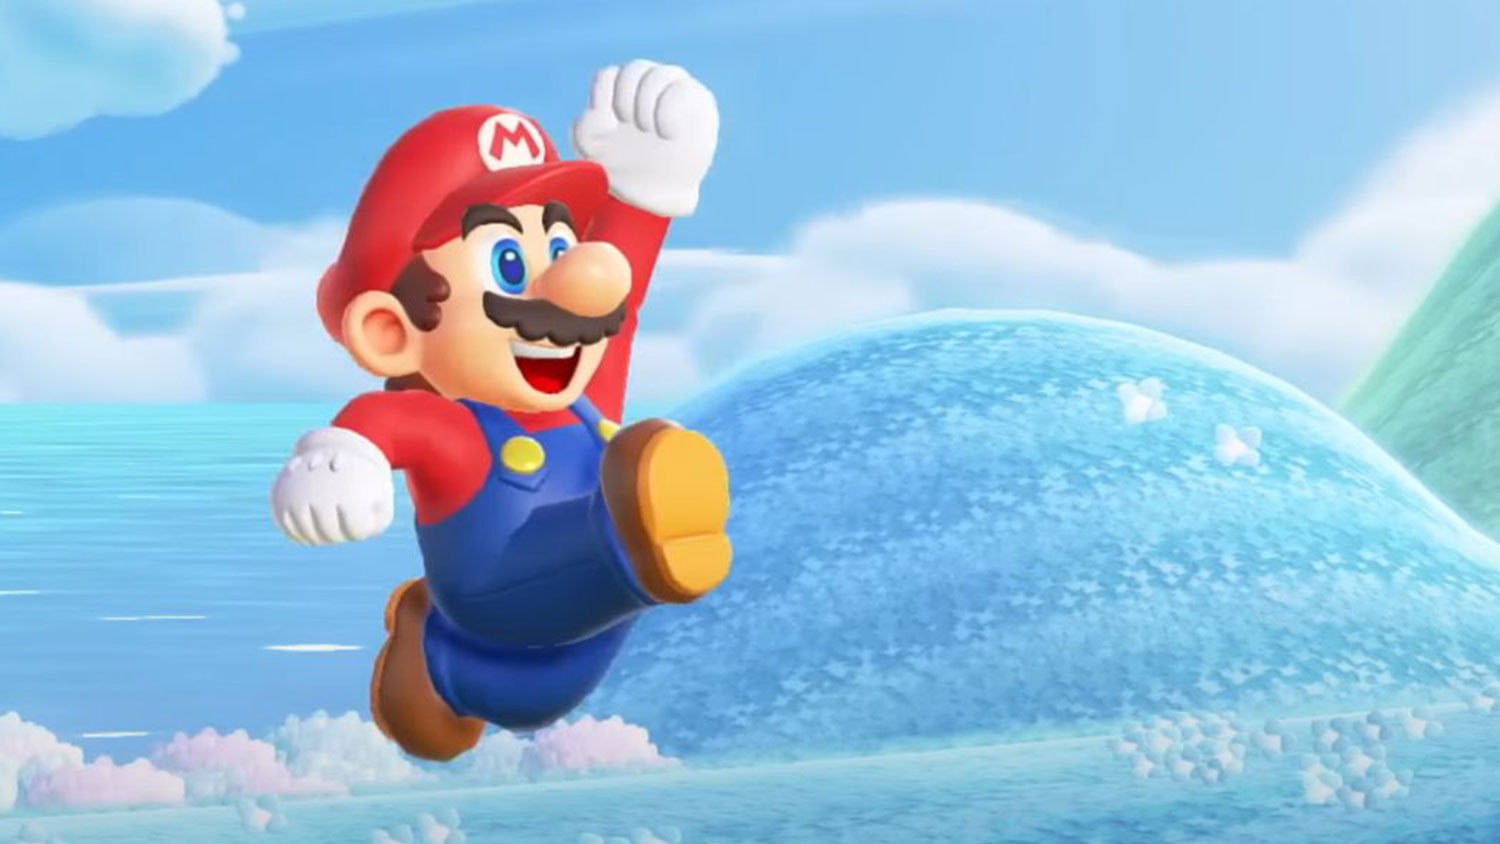 Super Mario Bros. Wonder is the fastest-selling Mario game of all time